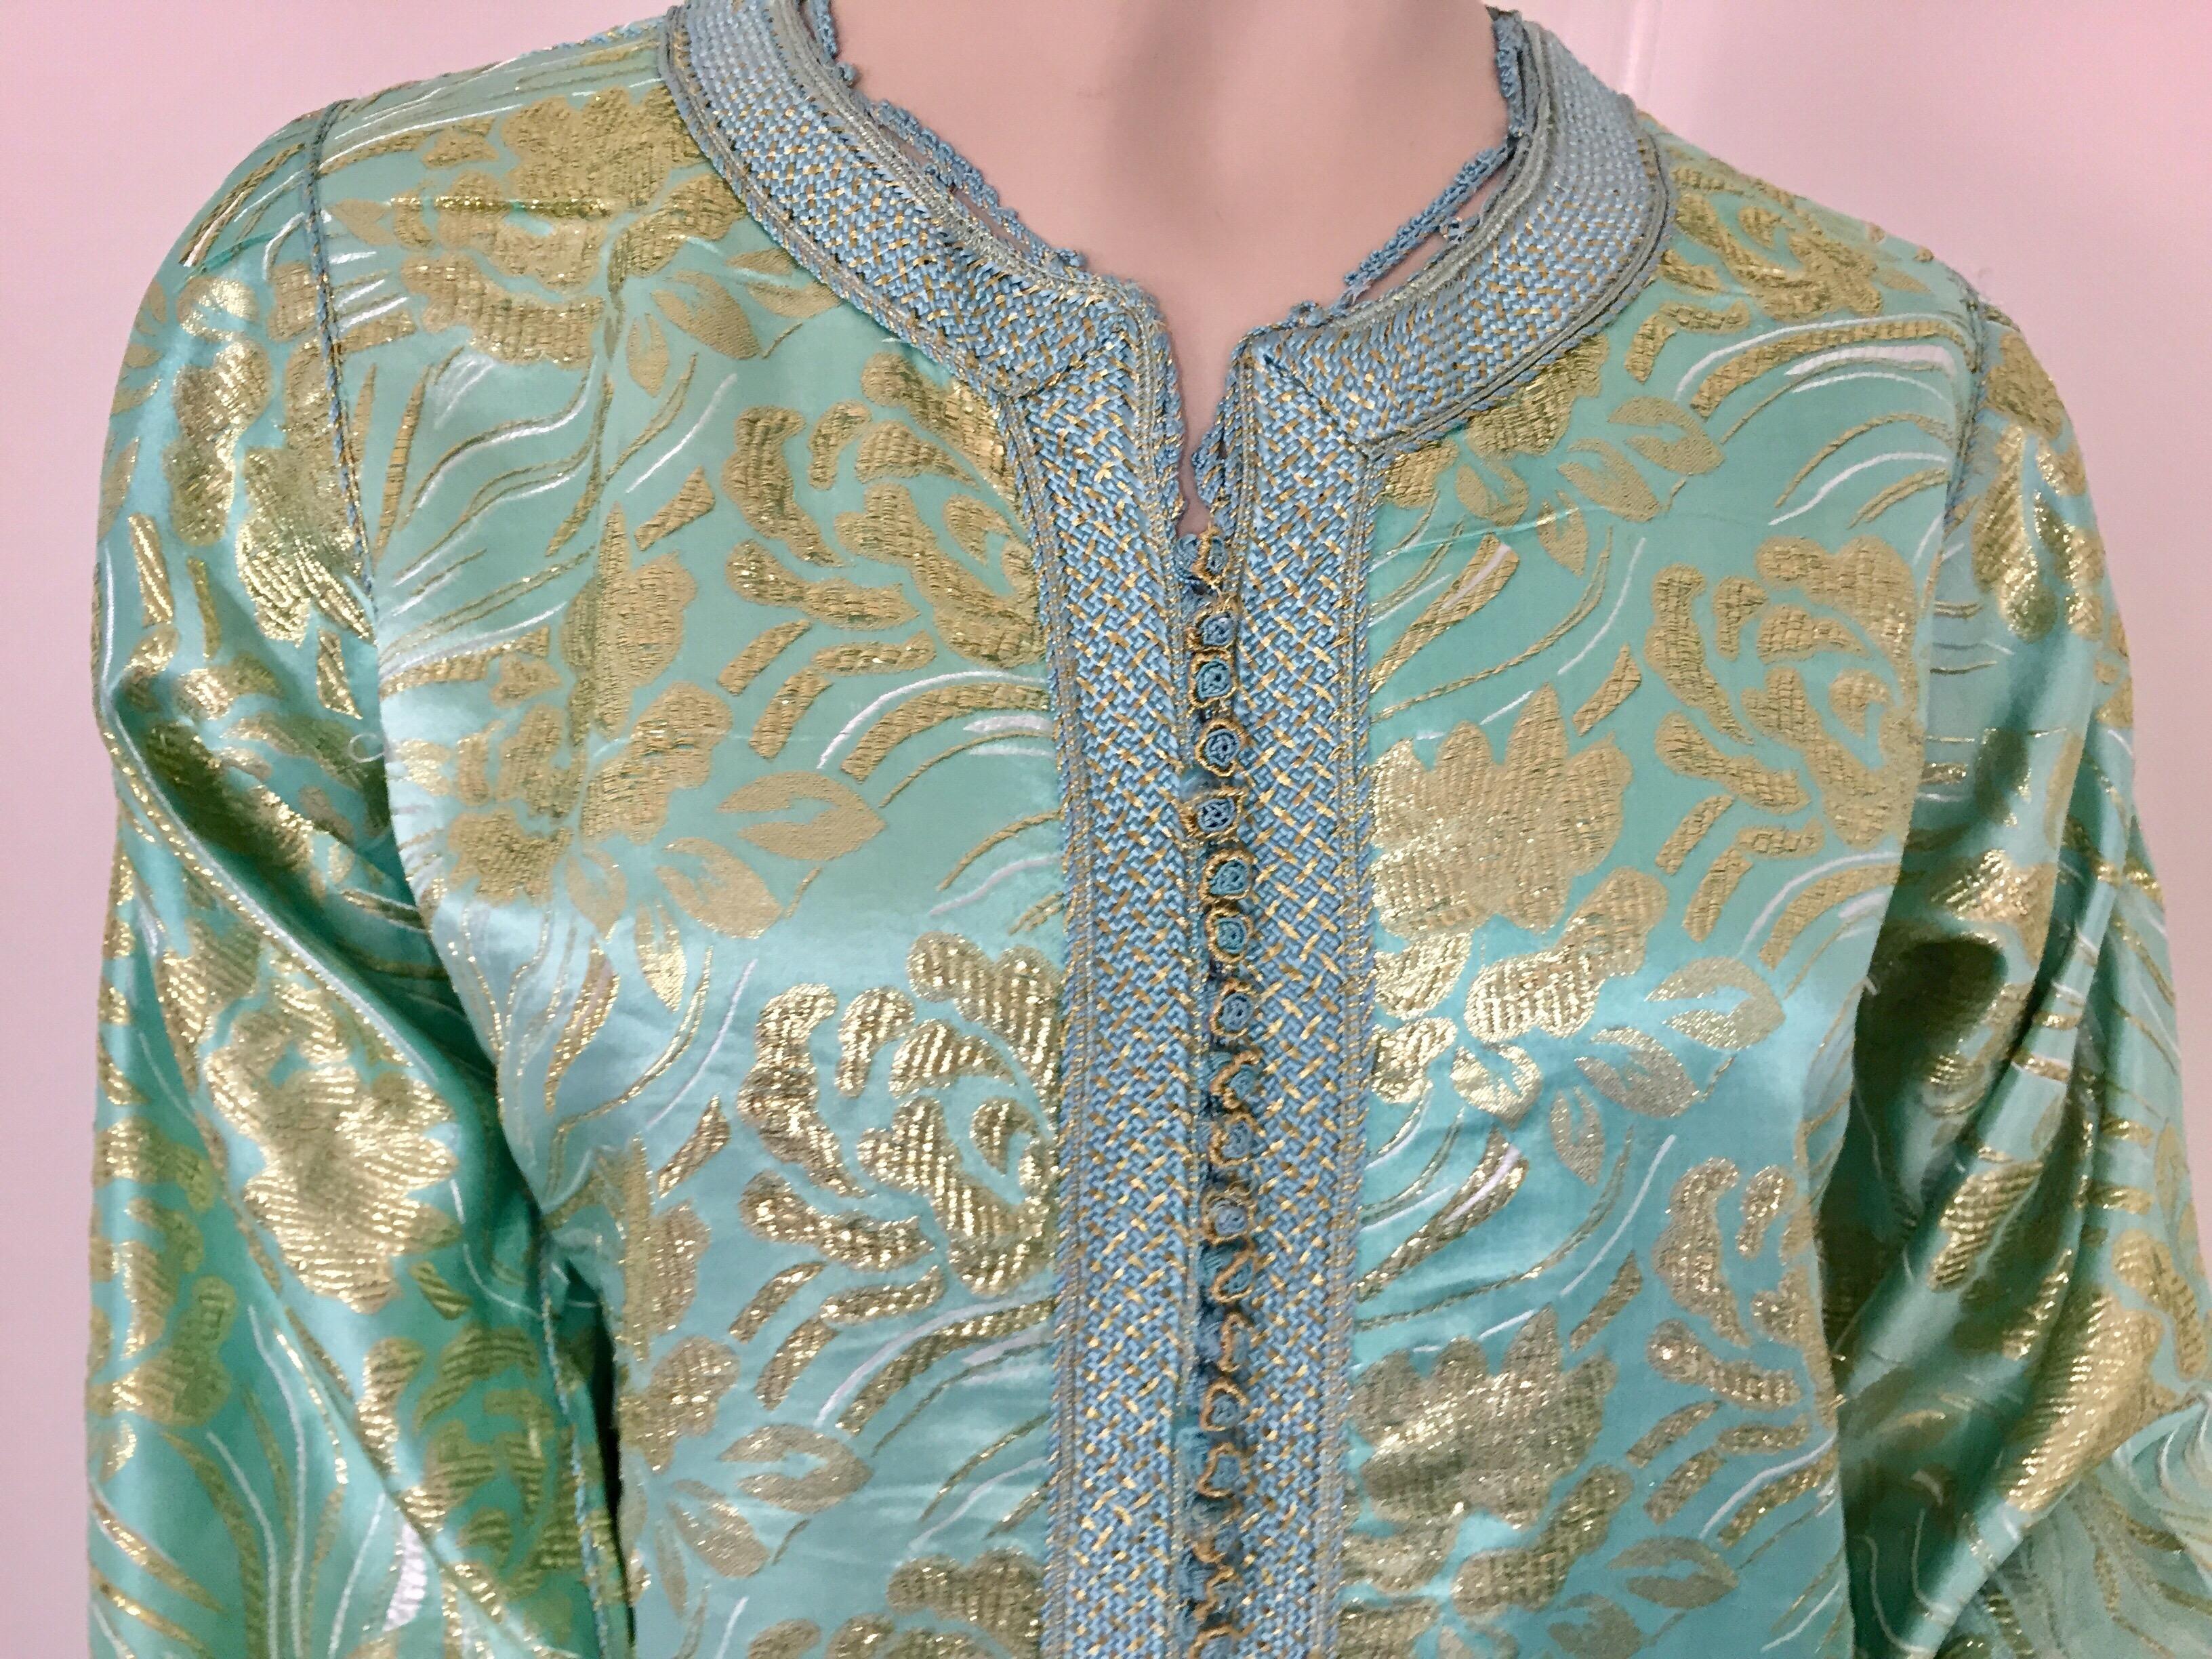 Fabric Moroccan Vintage Kaftan in Turquoise and Gold Floral Brocade Metallic Lame - 1 For Sale